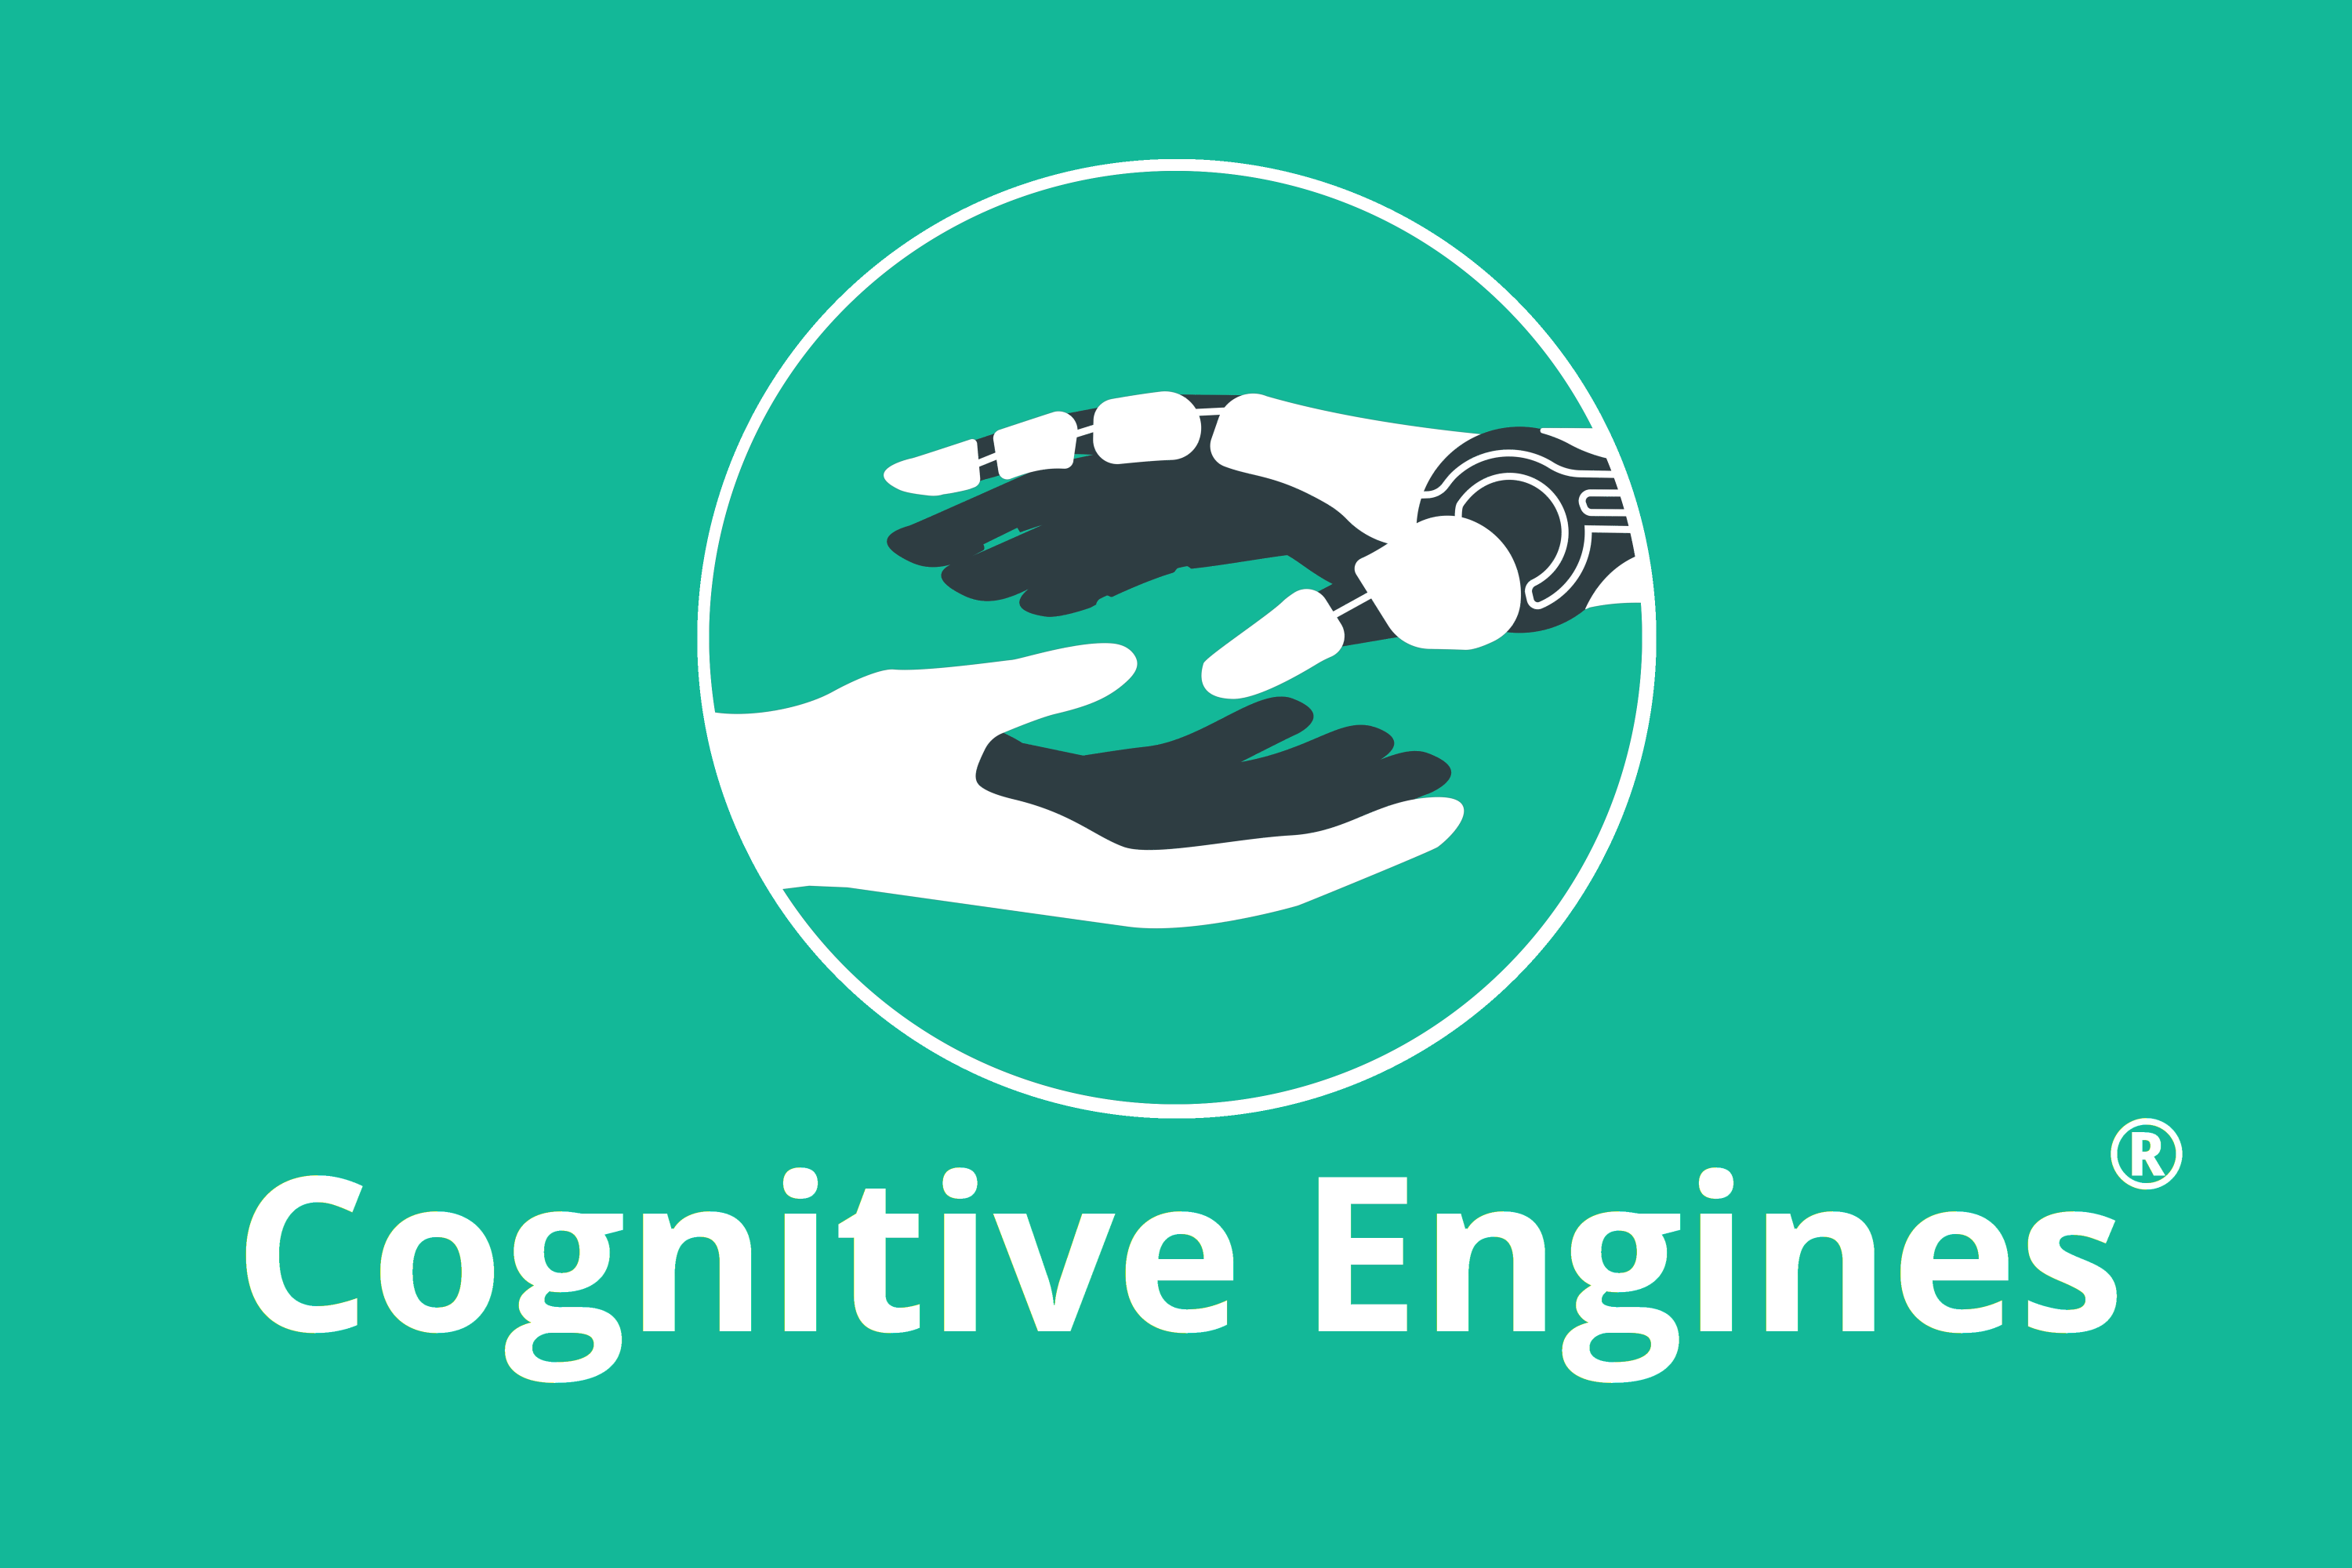 COGNITIVE ENGINES